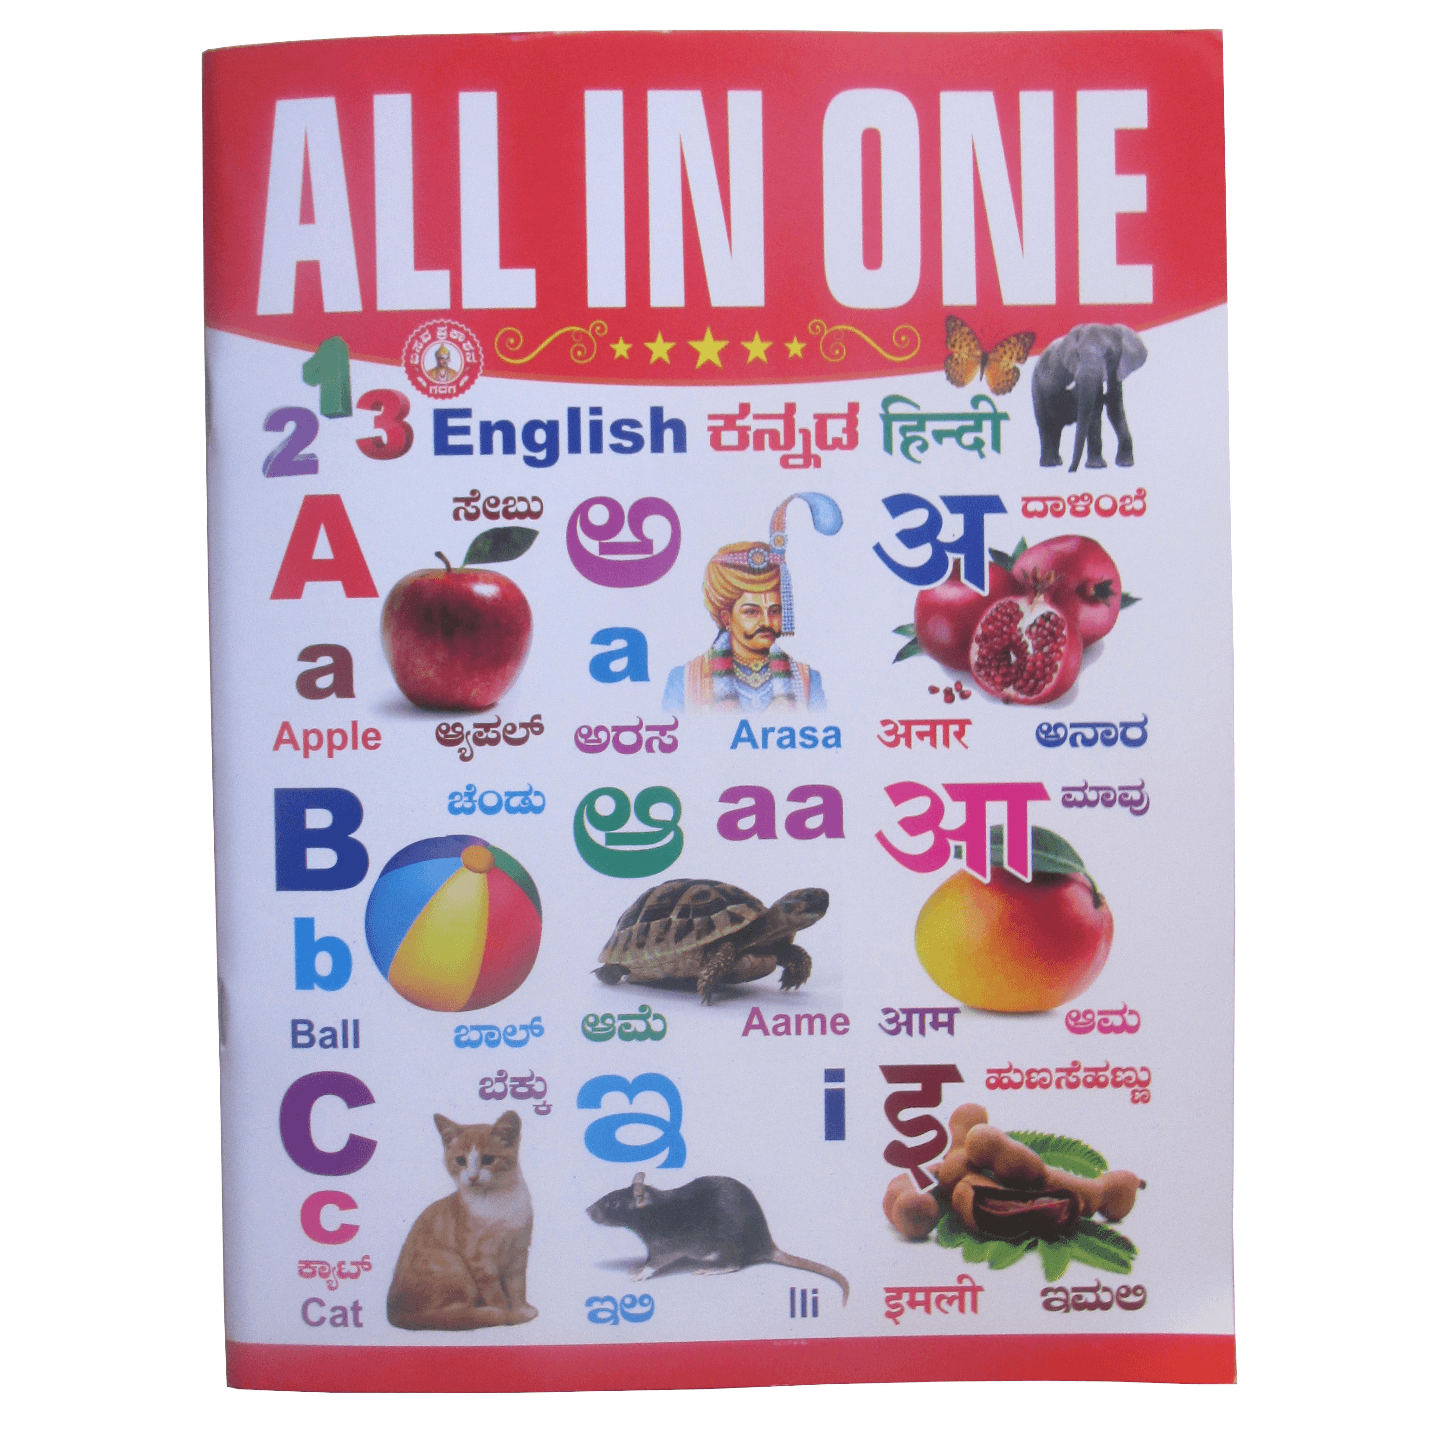 "All-in-One" Alphabets Learning Book for Kids in Kannada-English-Hindi